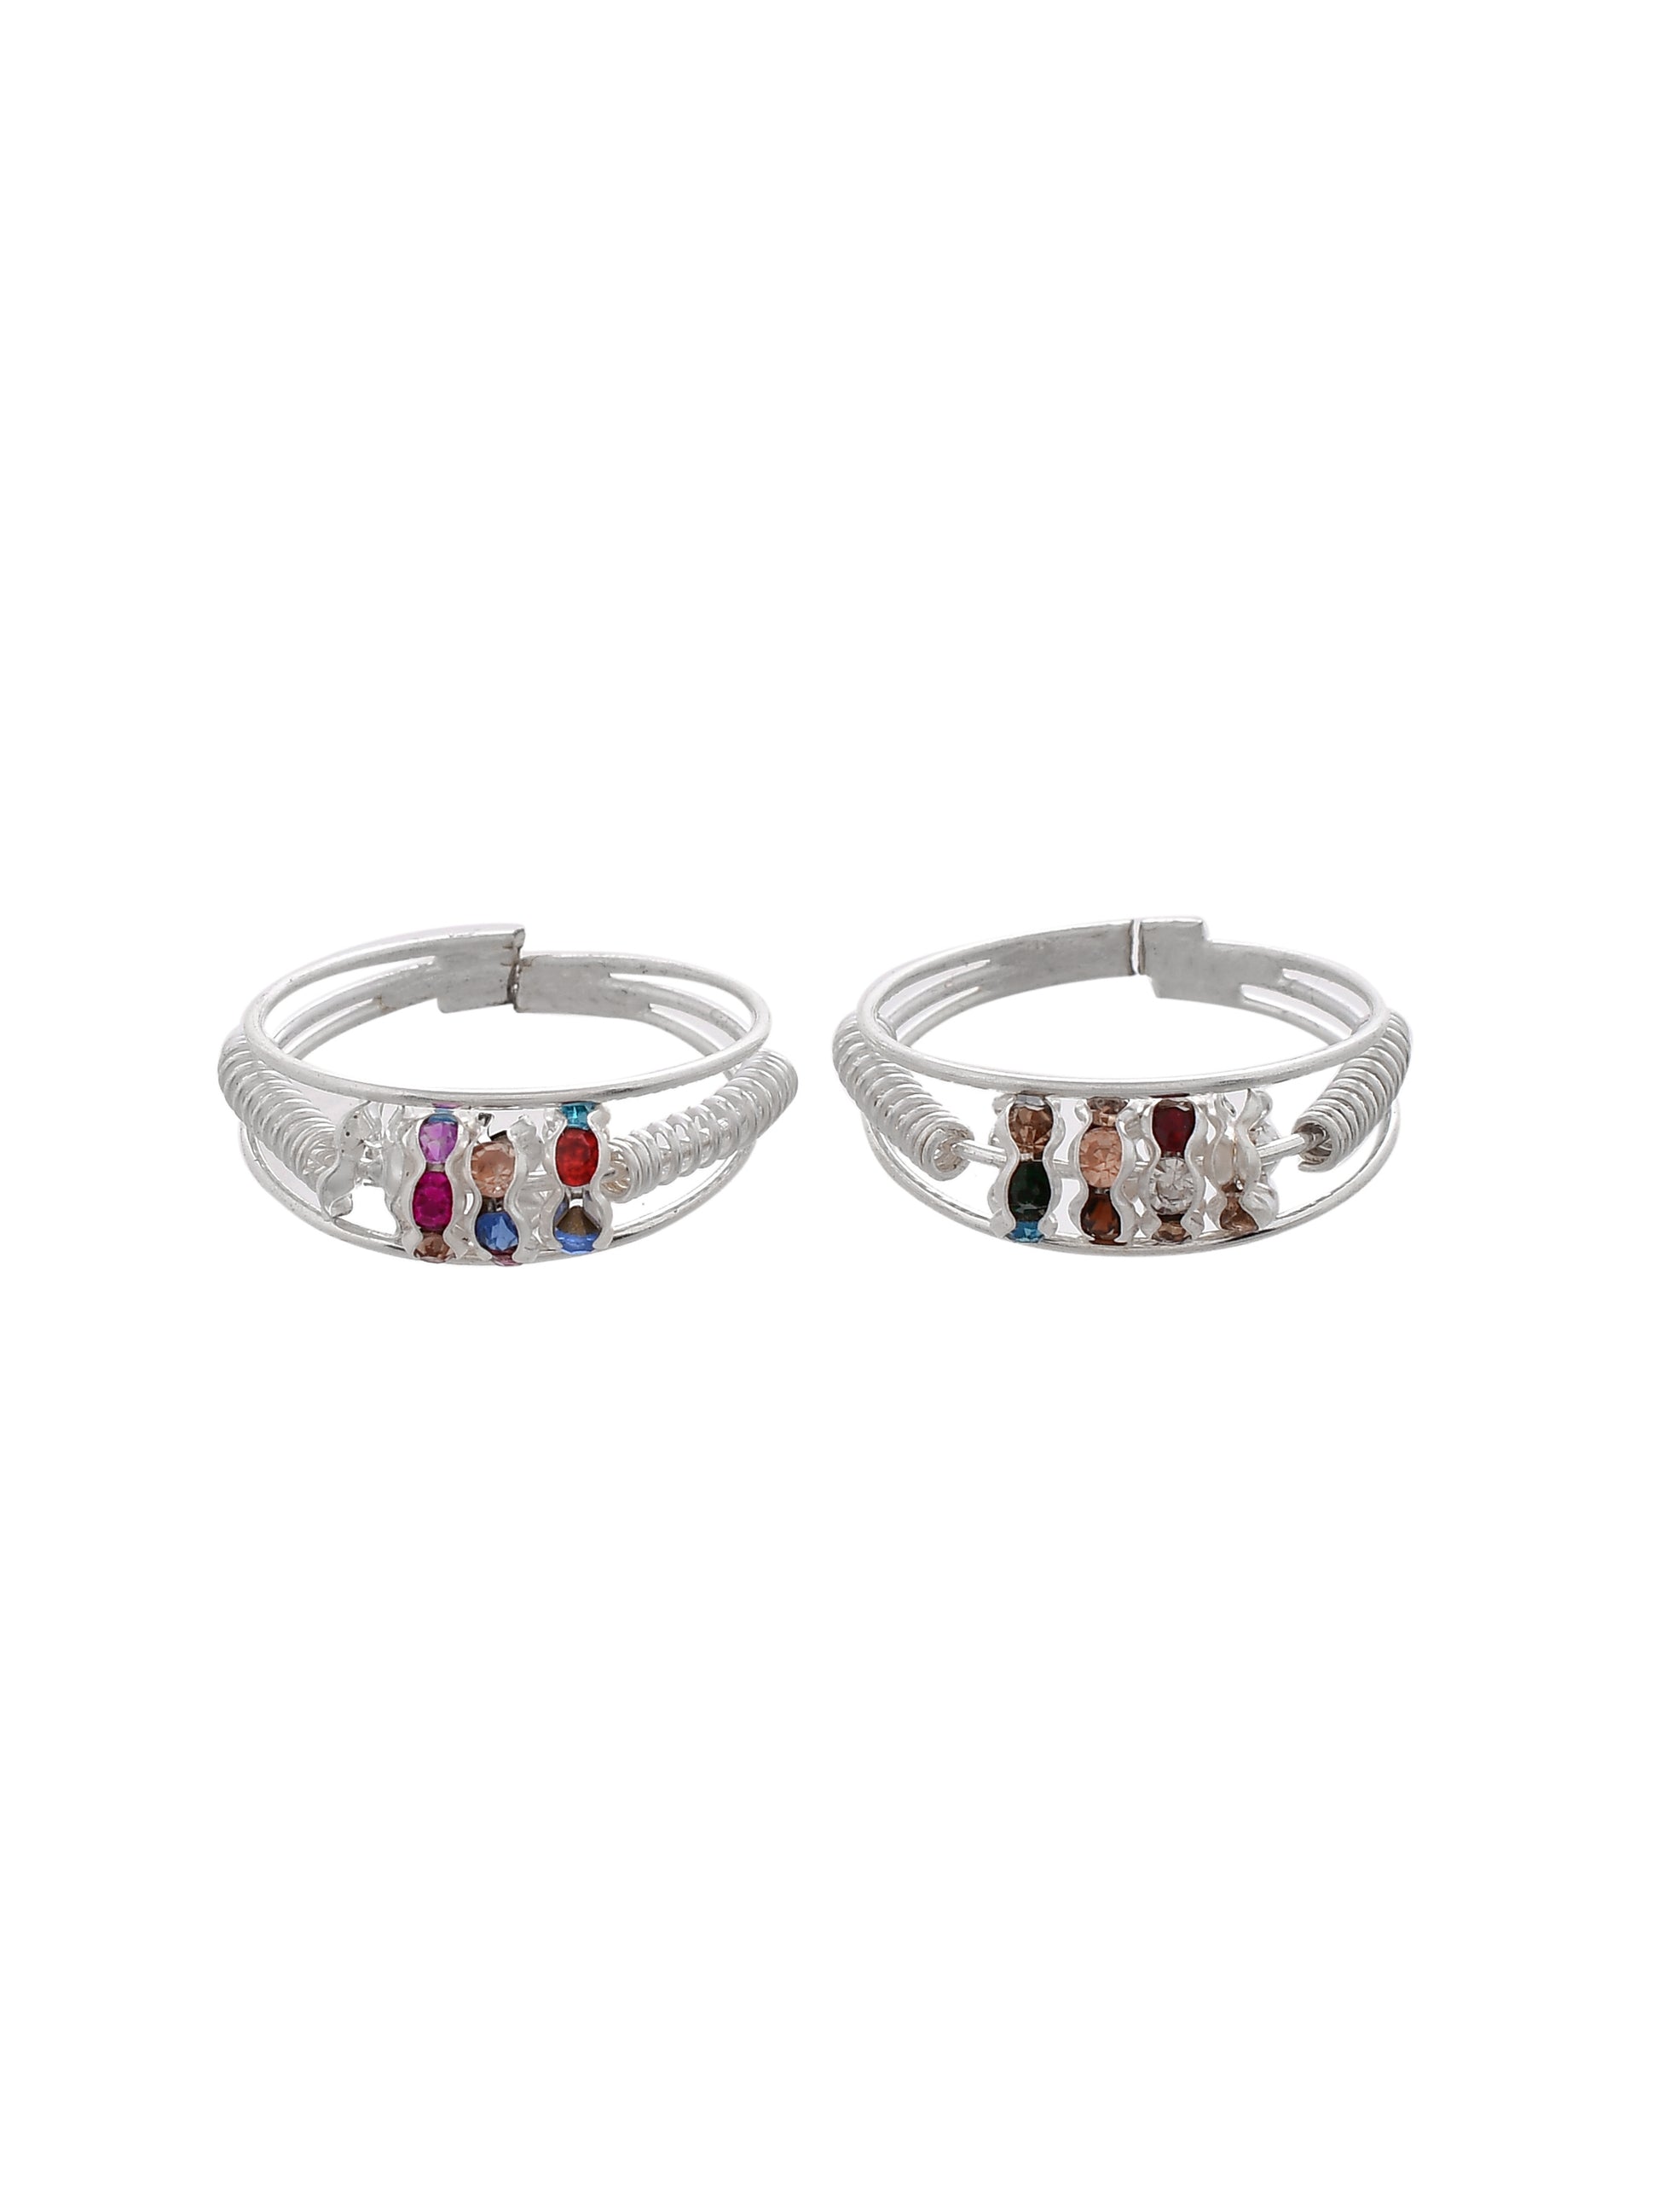 Set of 2 Silver Toe Rings